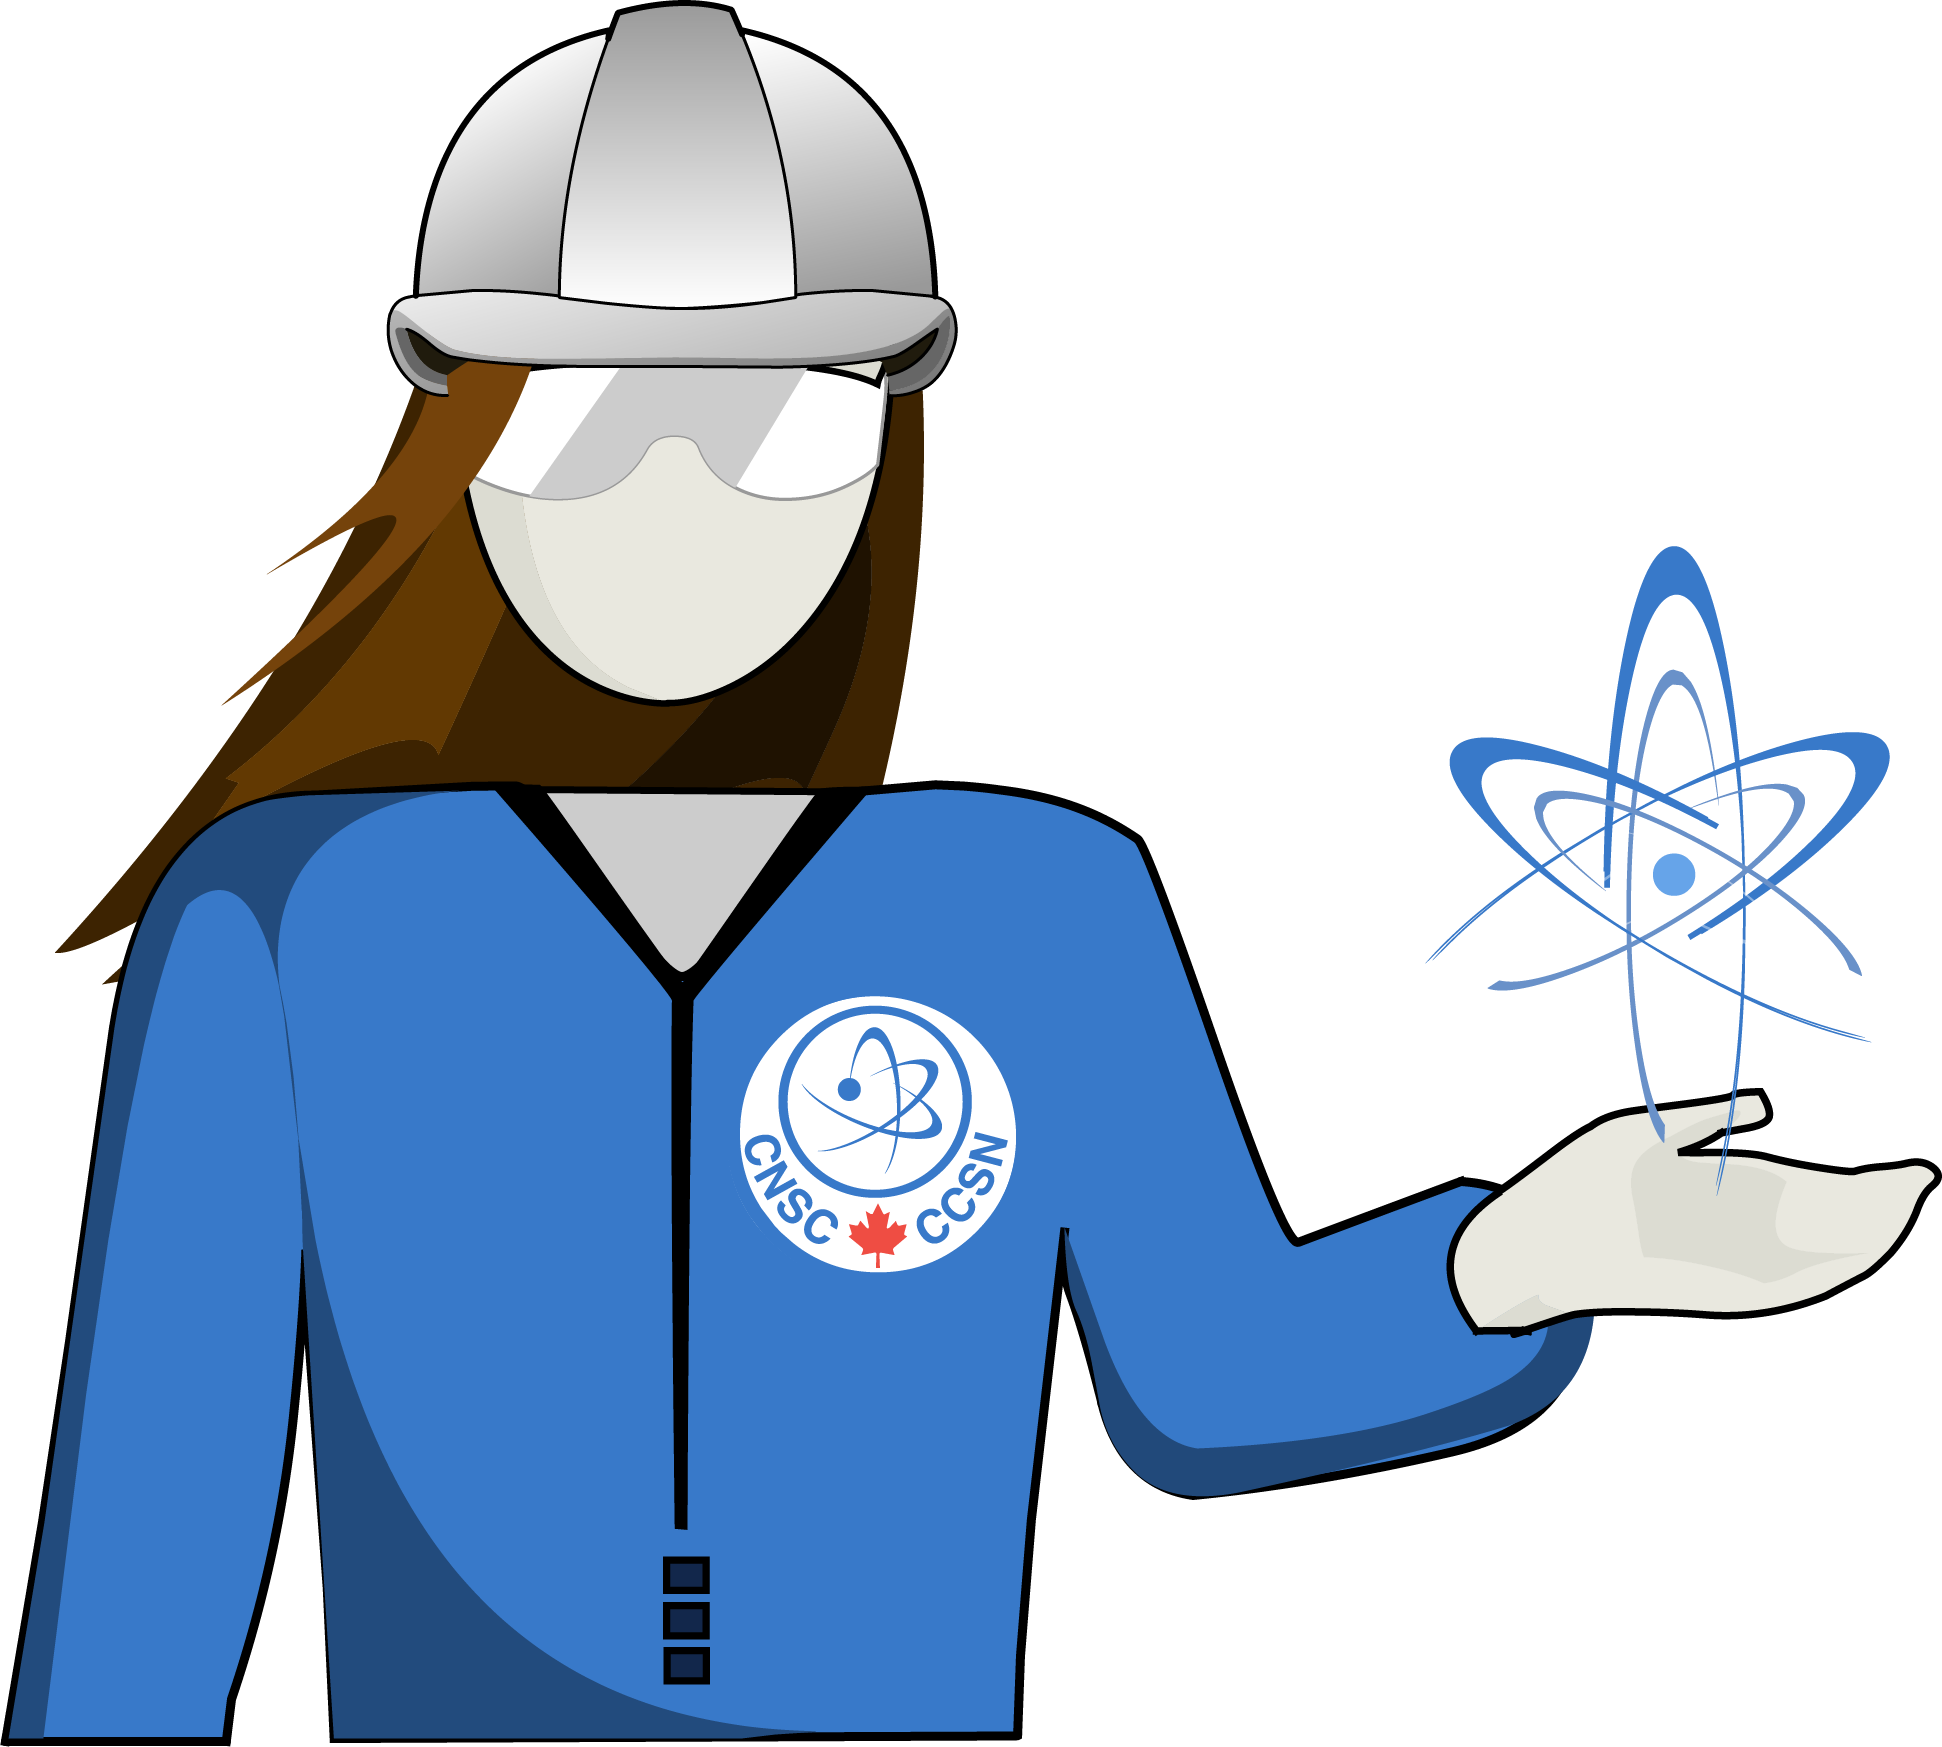 Candu inspection cnsc online. Engineering clipart nuclear engineer